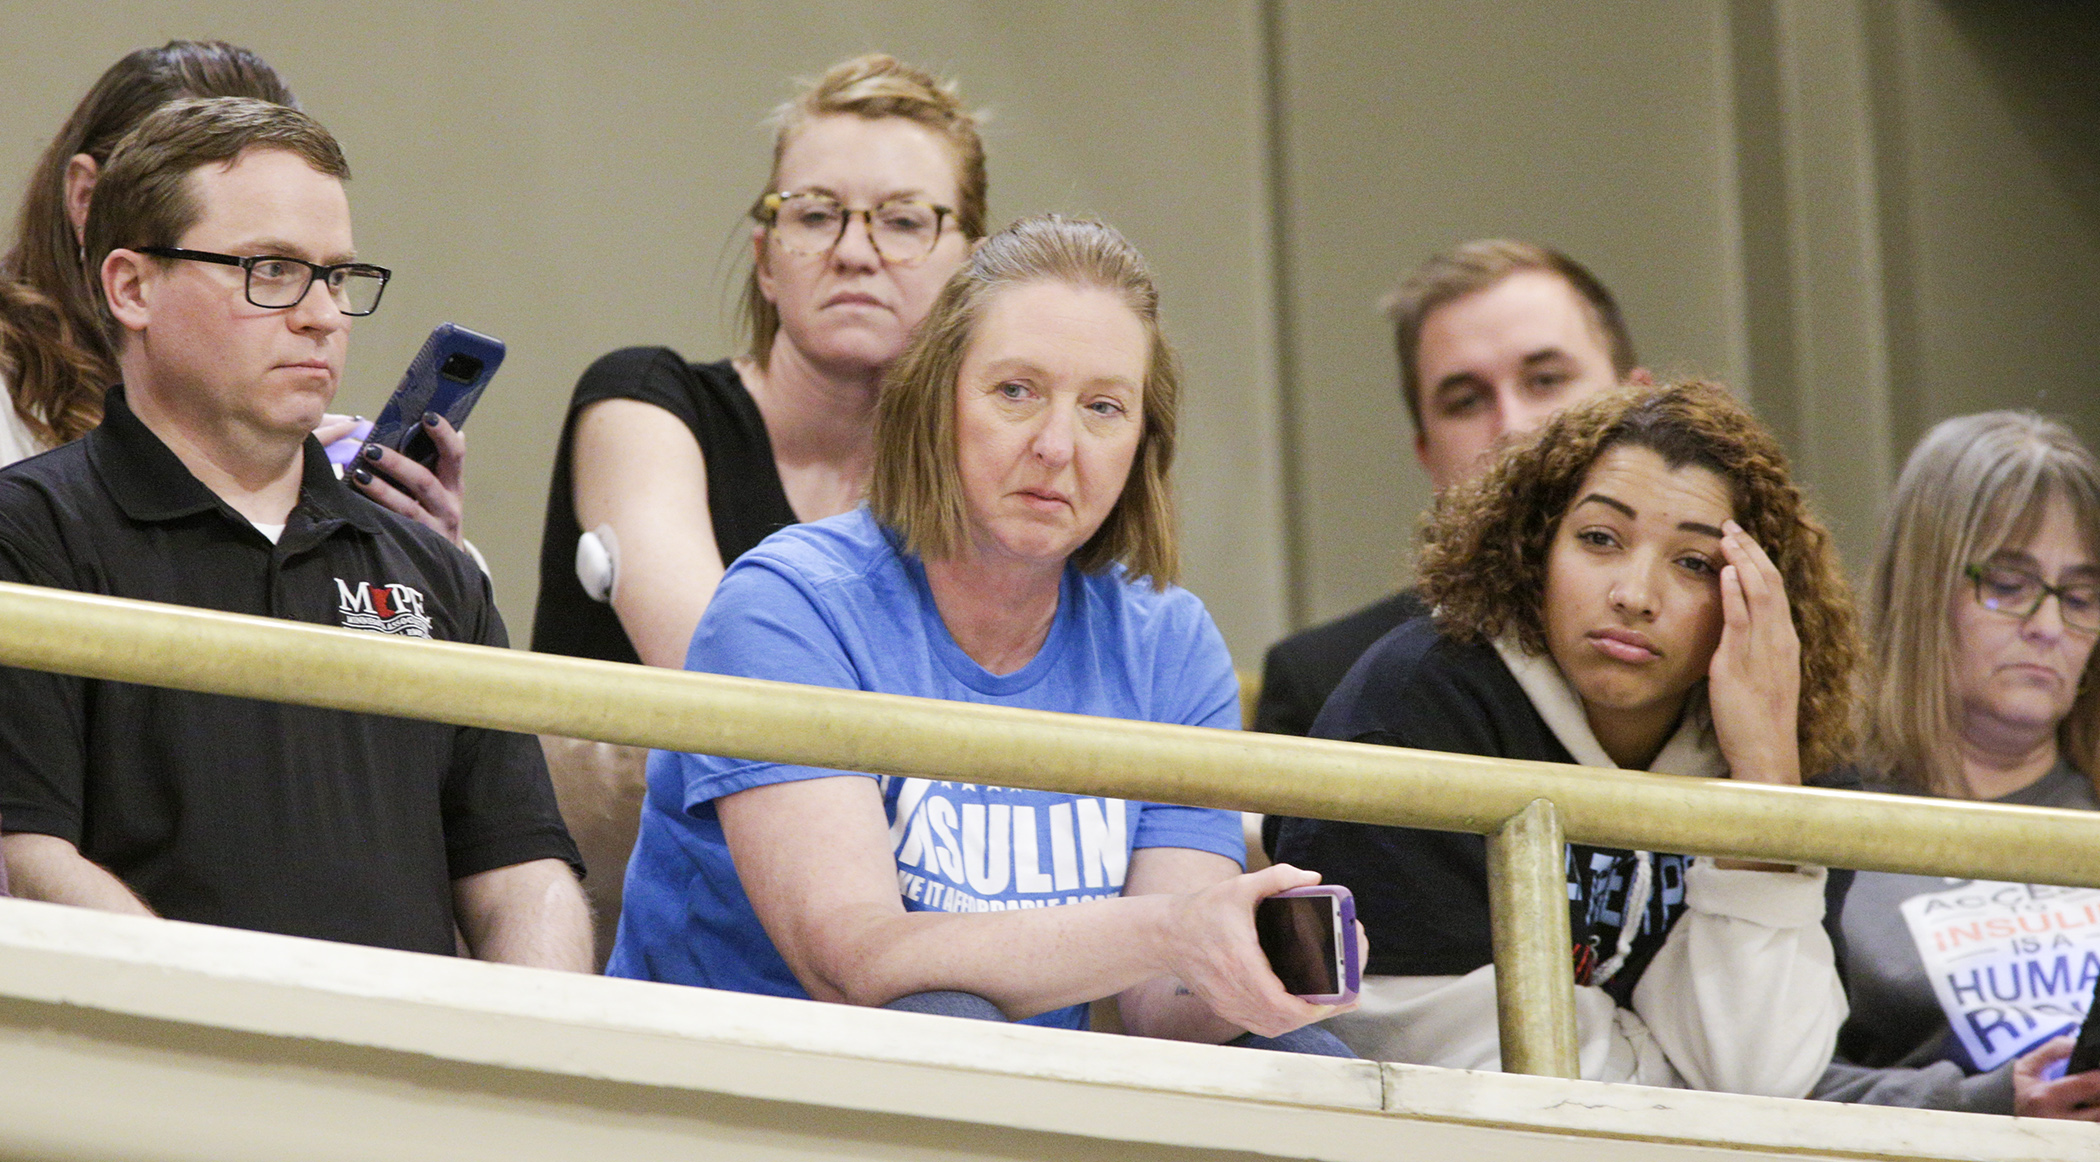 Nicole Smith-Holt listens to Feb. 26 debate from the House Gallery on HF3100, which would establish an emergency insulin program. Smith’s son, Alec, died in 2017 from diabetic ketoacidosis. Photo by Paul Battaglia